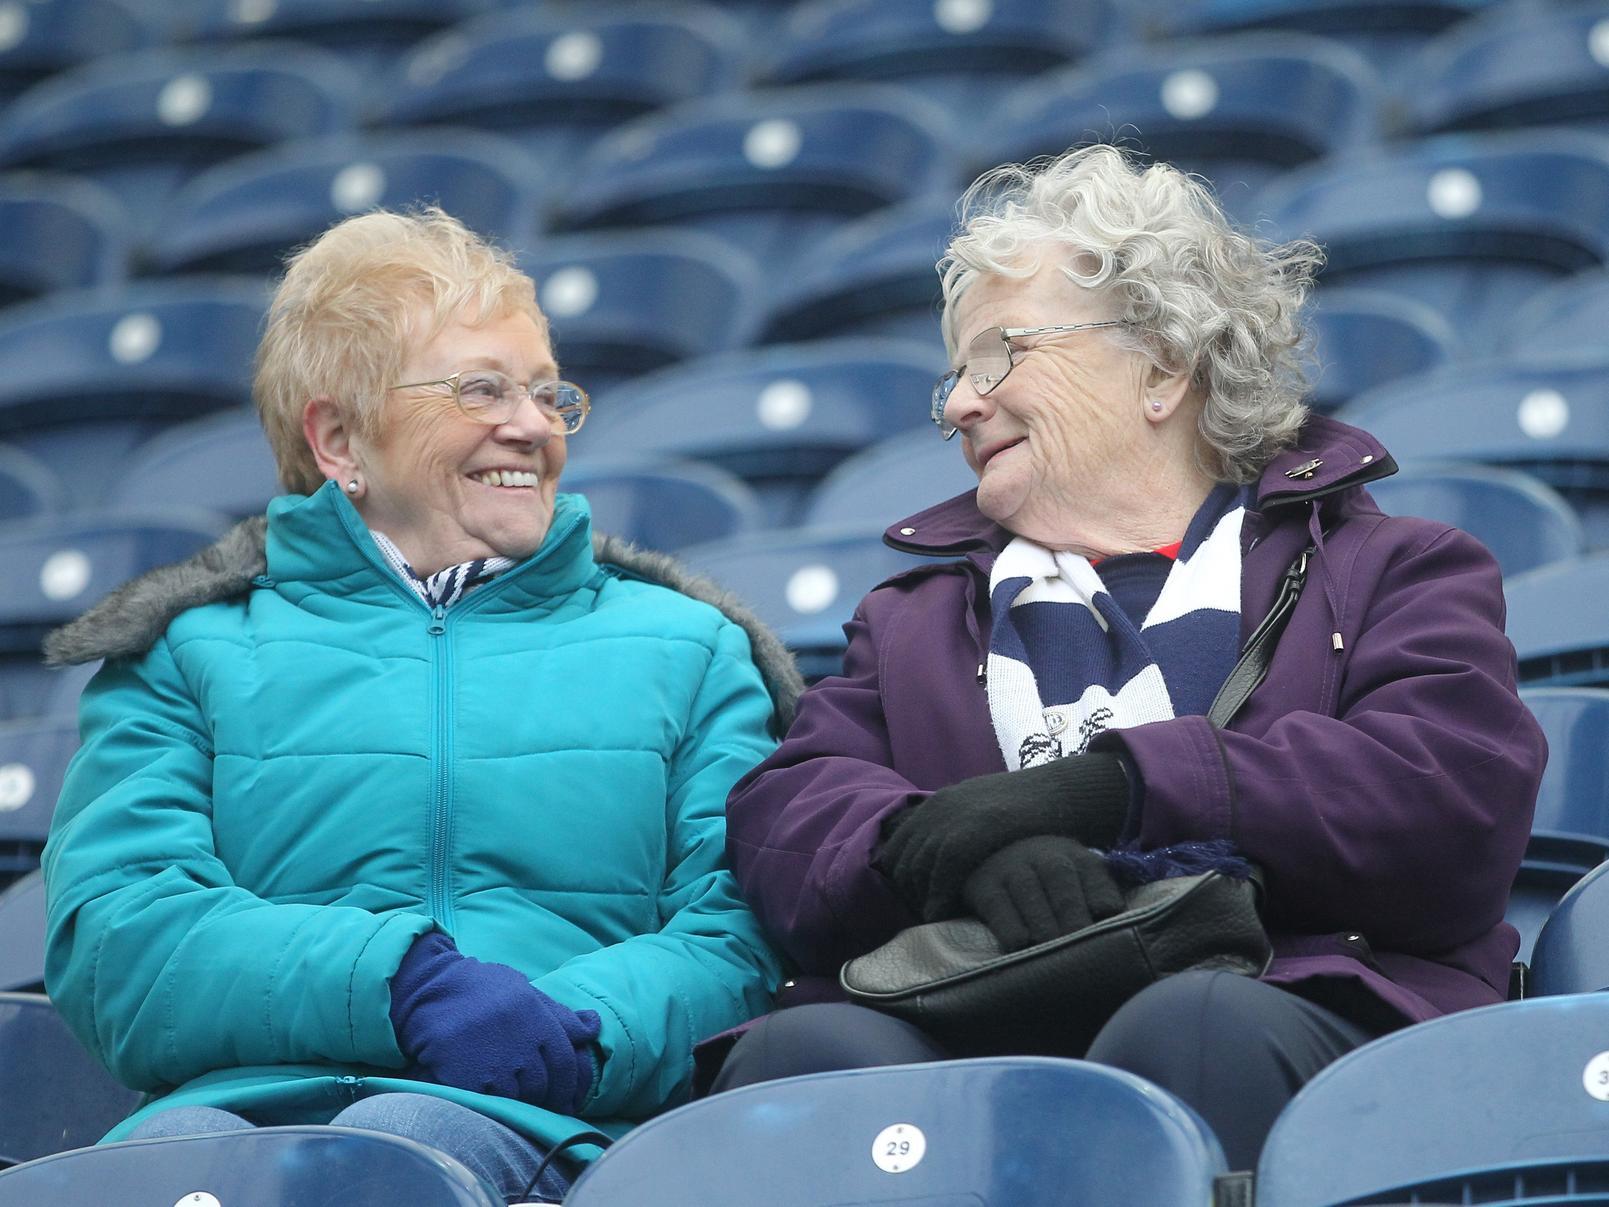 Two Preston fans share a smiling glance to each other, wrapped up ready for the contest.